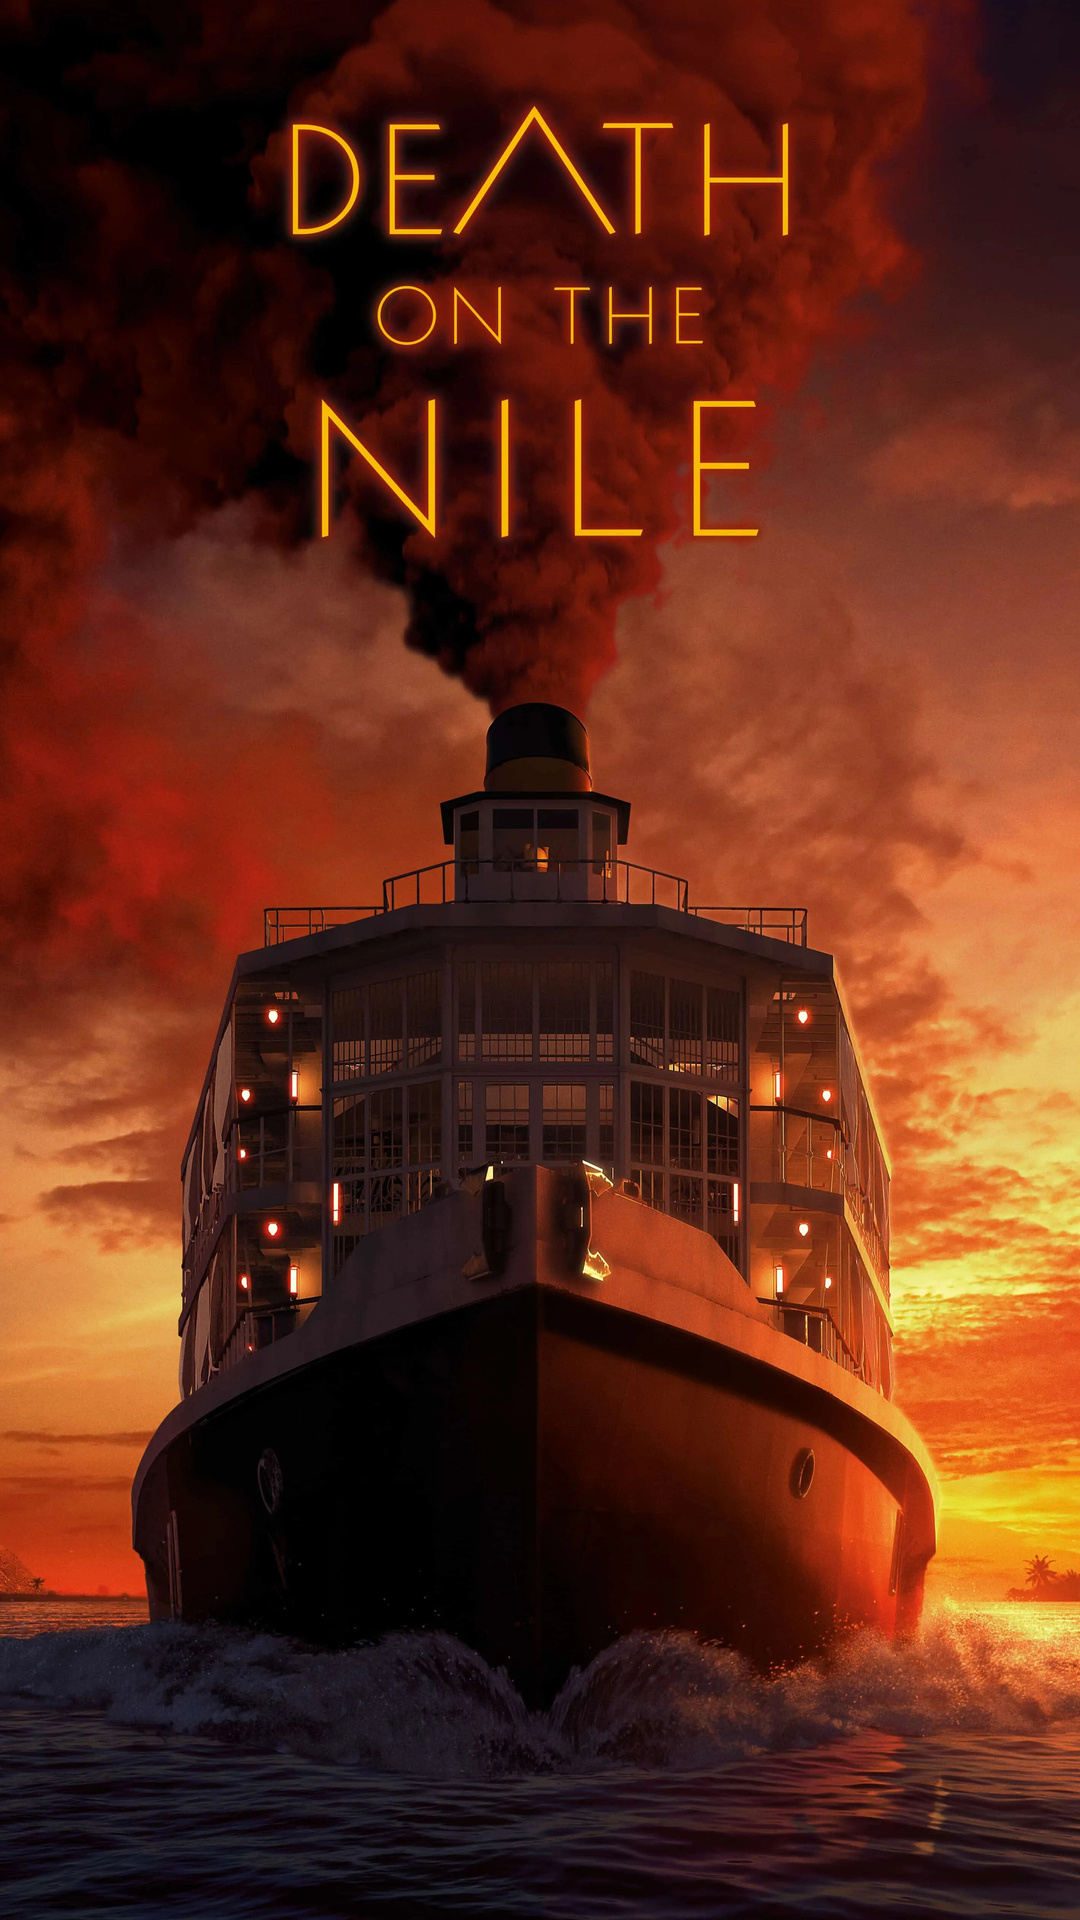 Death on the Nile, iPhone wallpapers, High definition, Stunning imagery, 1080x1920 Full HD Phone